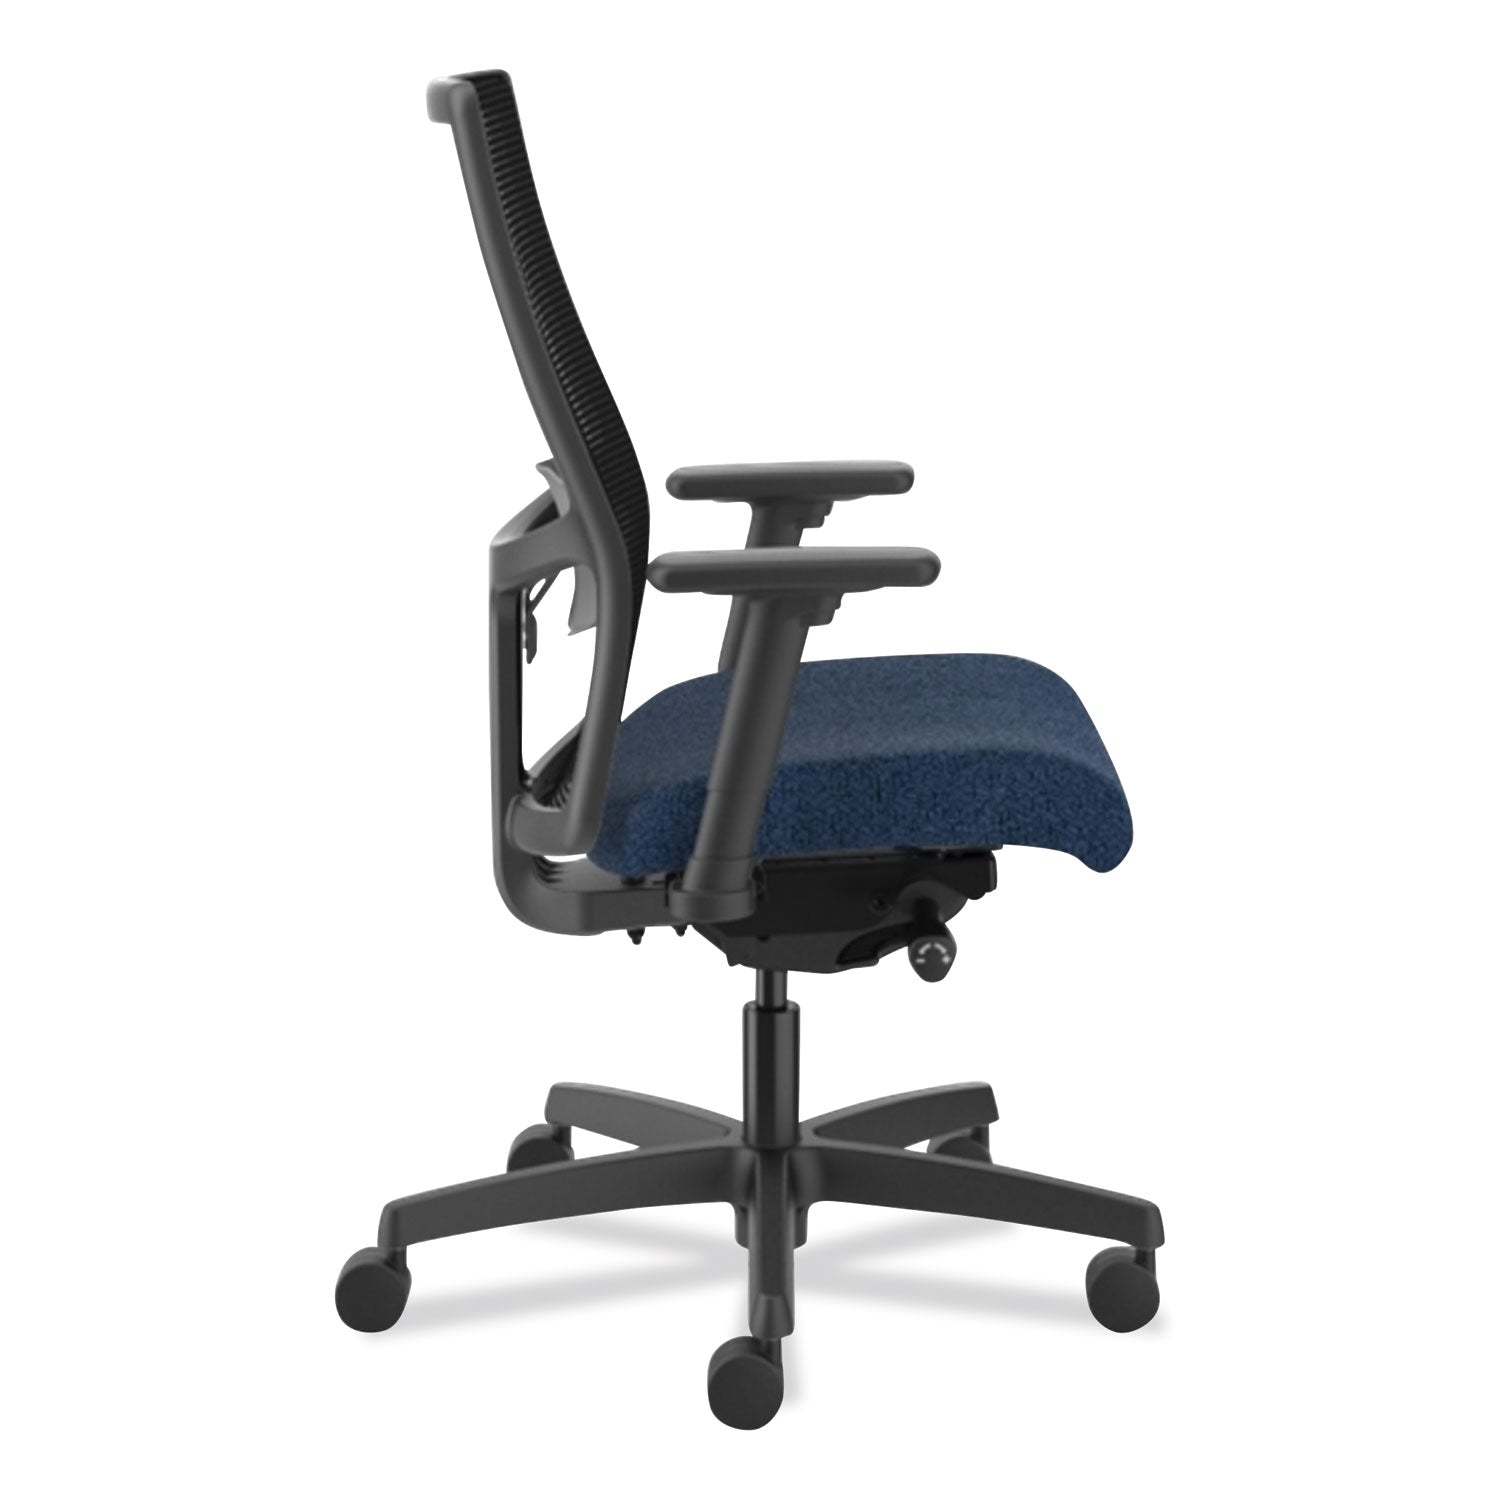 ignition-20-4-way-stretch-mid-black-mesh-task-chair-supports-300-lb-17-to-21-seat-ht-navy-black-ships-in-7-10-bus-days_honi2m2bmla13tk - 3